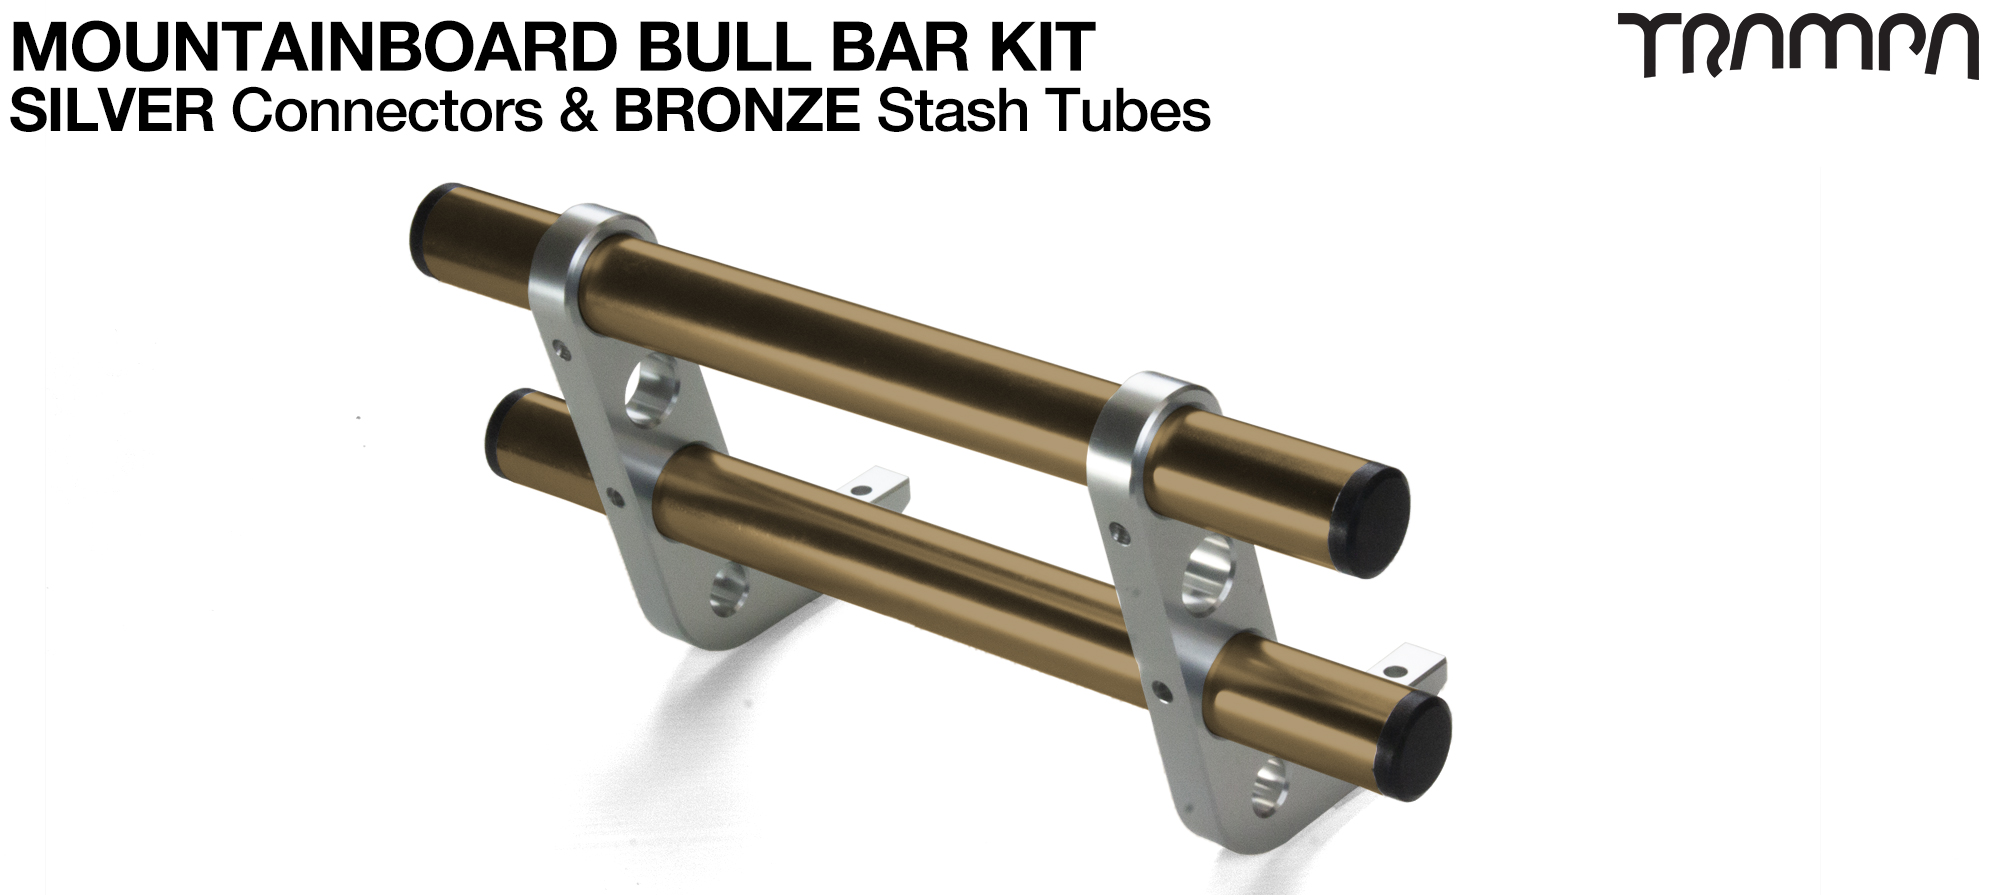 SILVER Uprights & BRONZE Crossbar BULL BARS for MOUNTAINBOARDS T6 Heat Treated CNC'd Aluminium Uprights, with Hollow Aluminium Stash Tubes with Rubber end bungs 